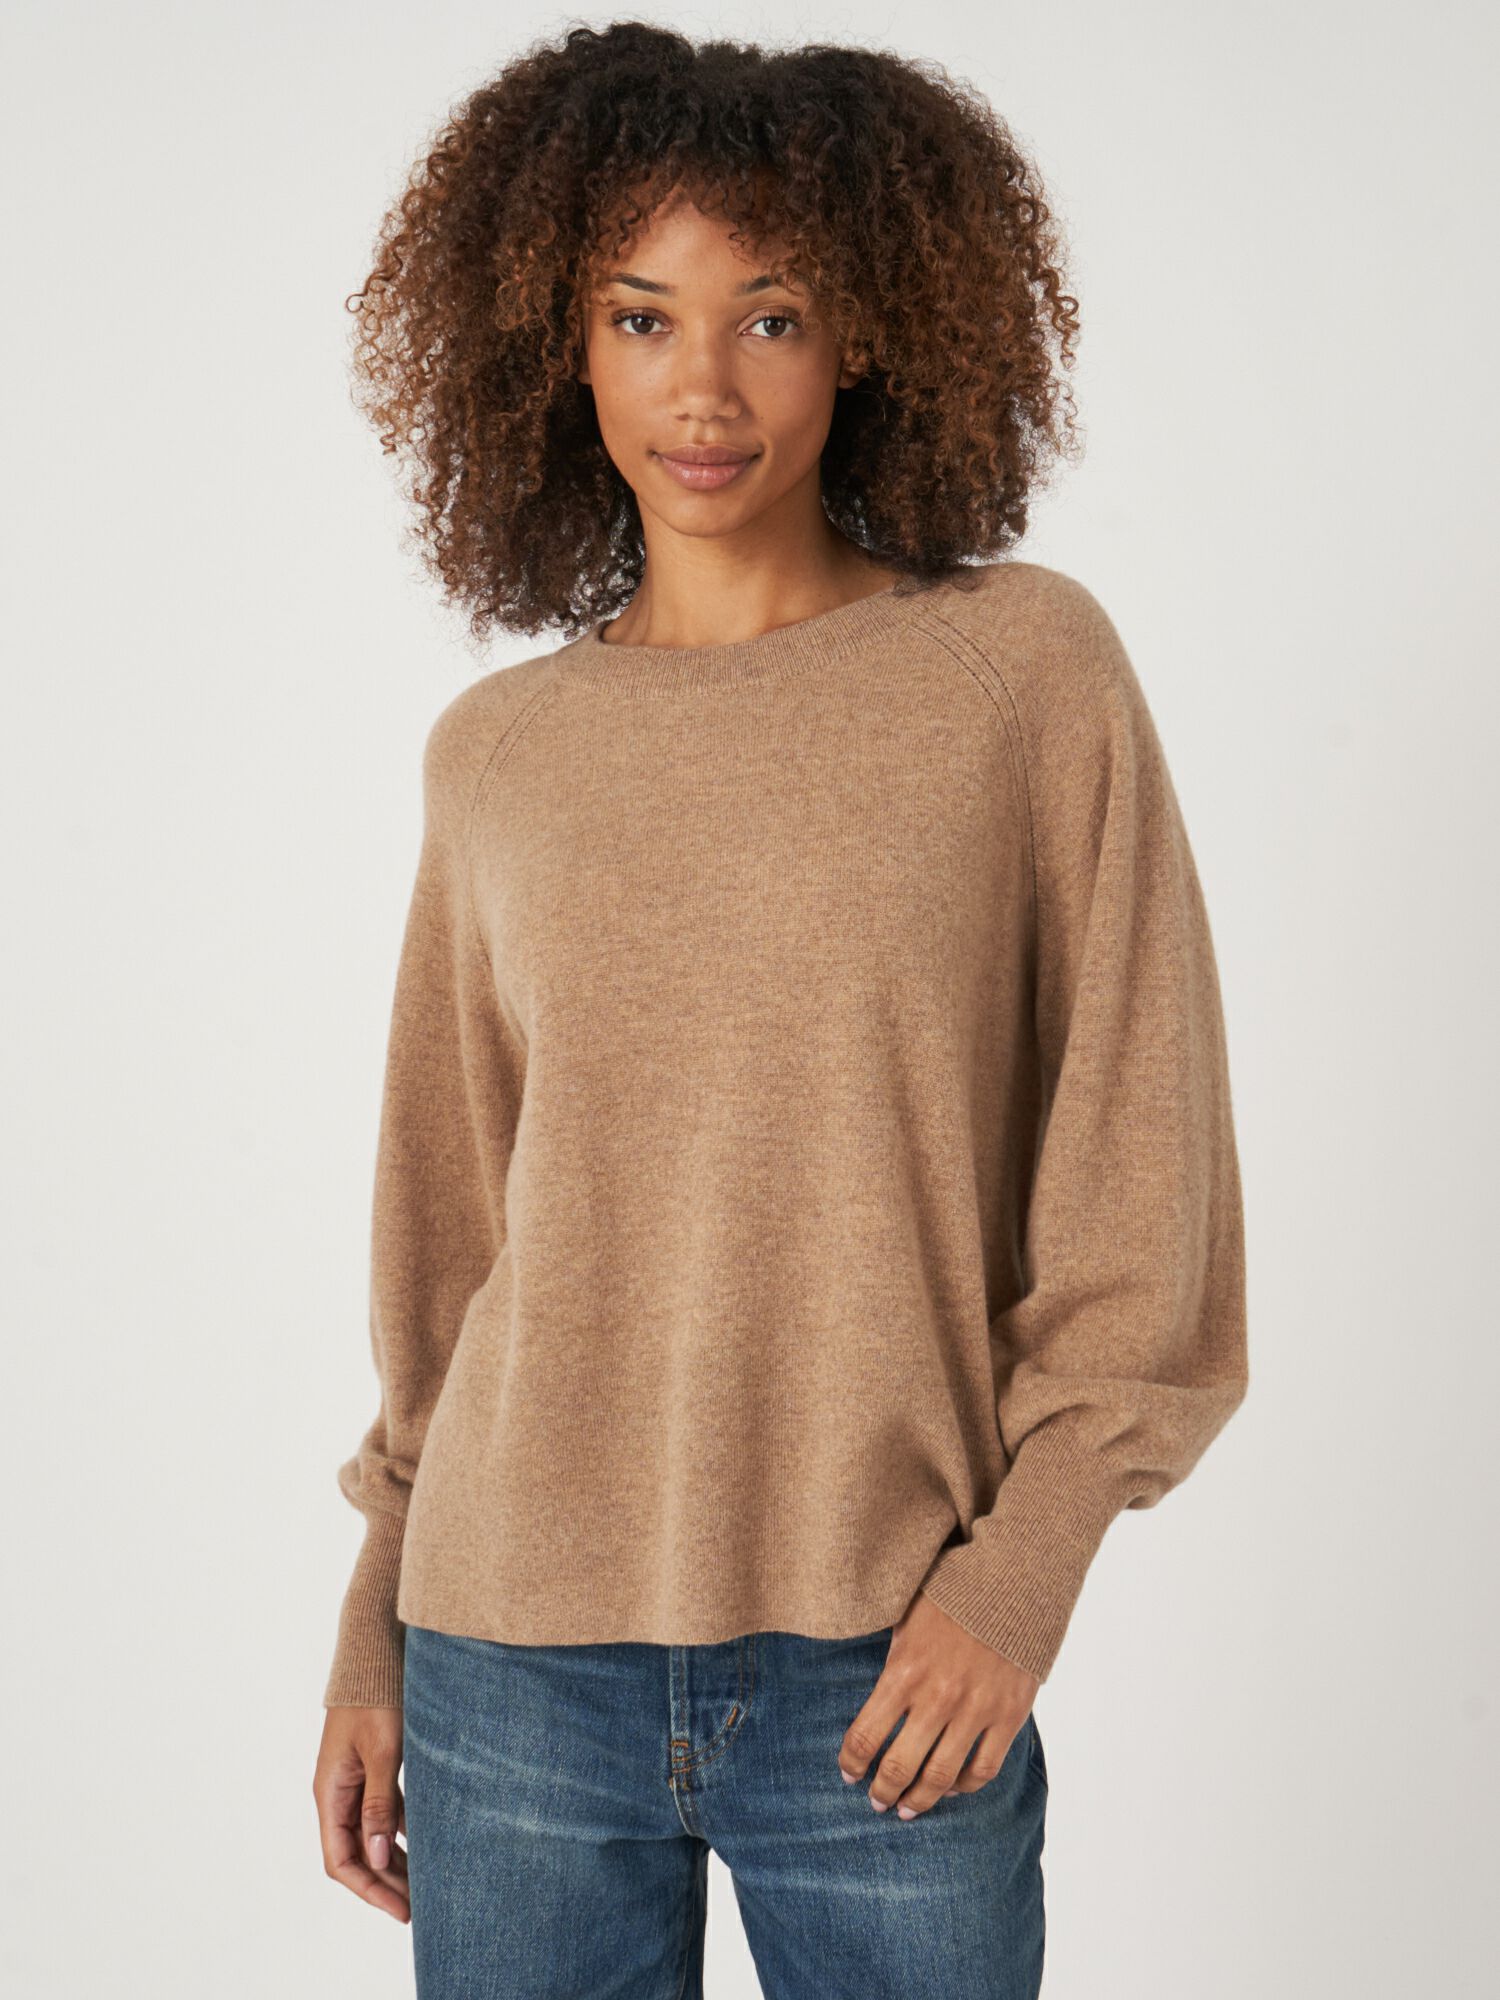 Women's Cashmere raglan sweater with high ribbed hem and side slit